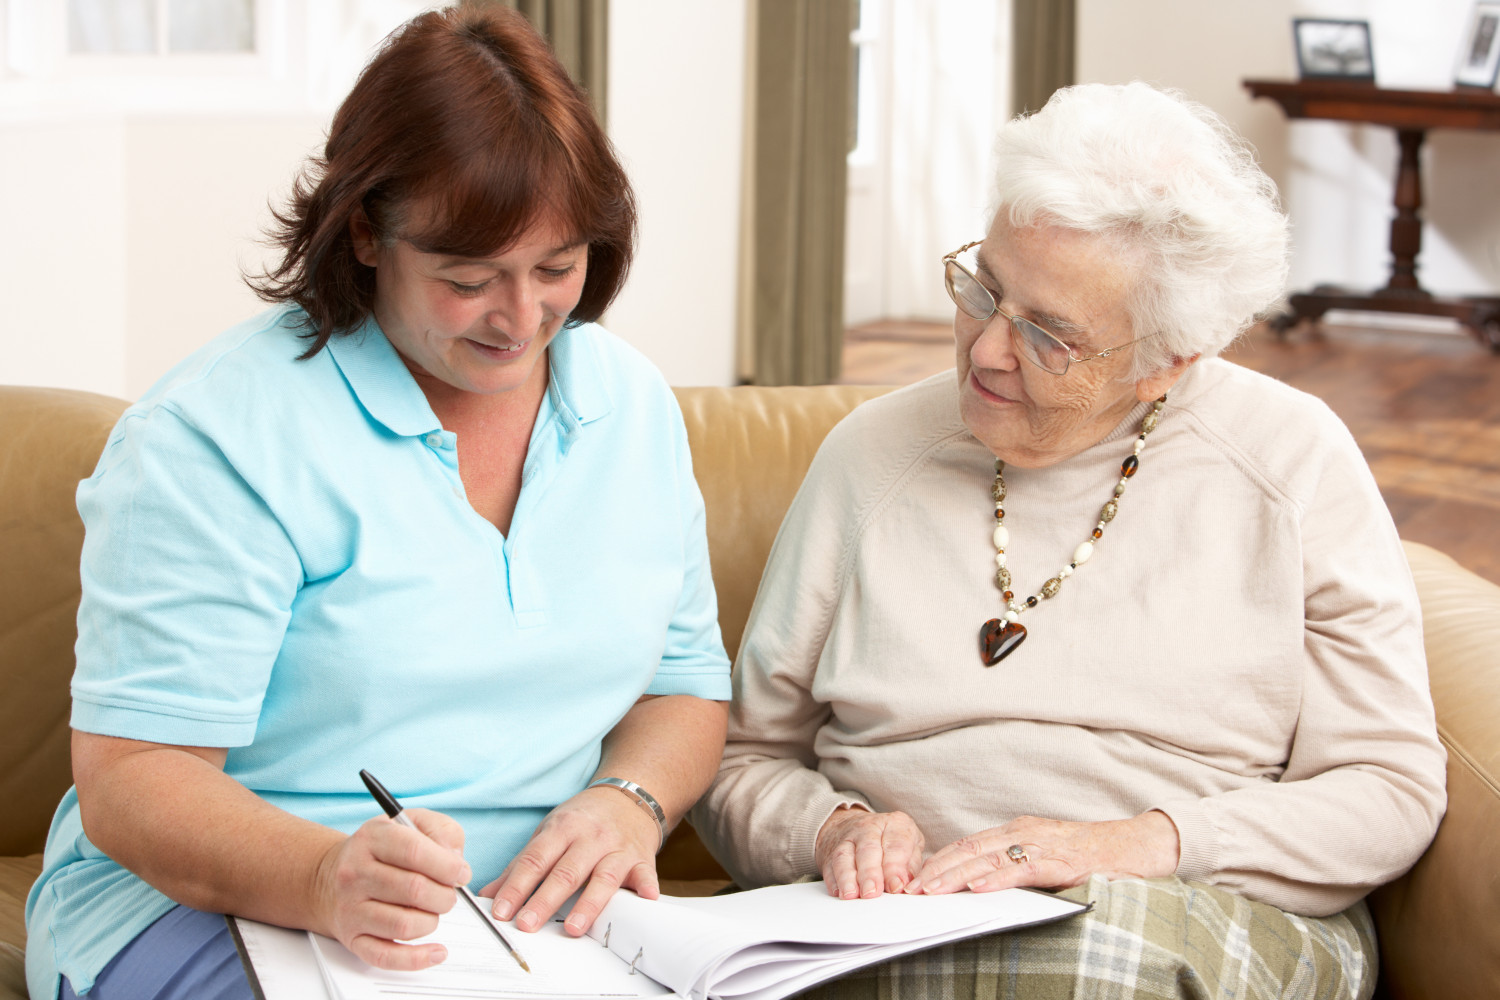 Woman reviewing NDIS plan with support coordinator, discussing day program options